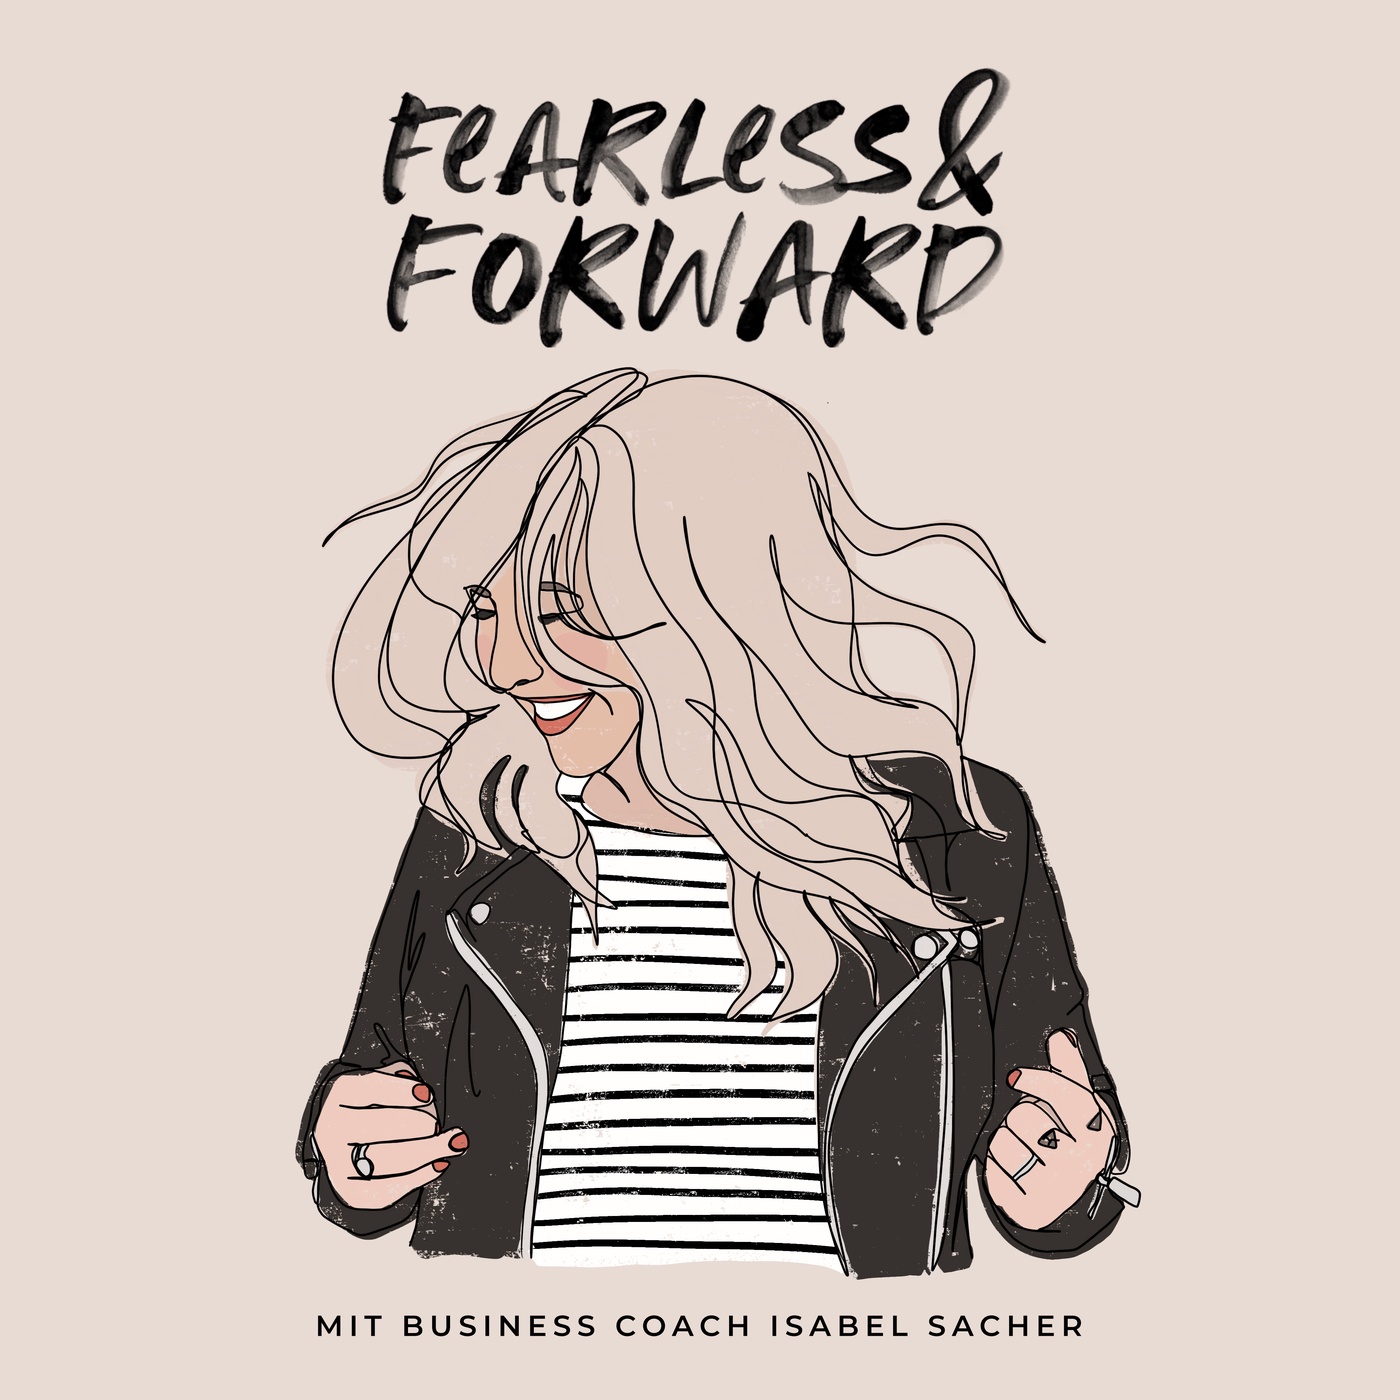 Fearless and Forward